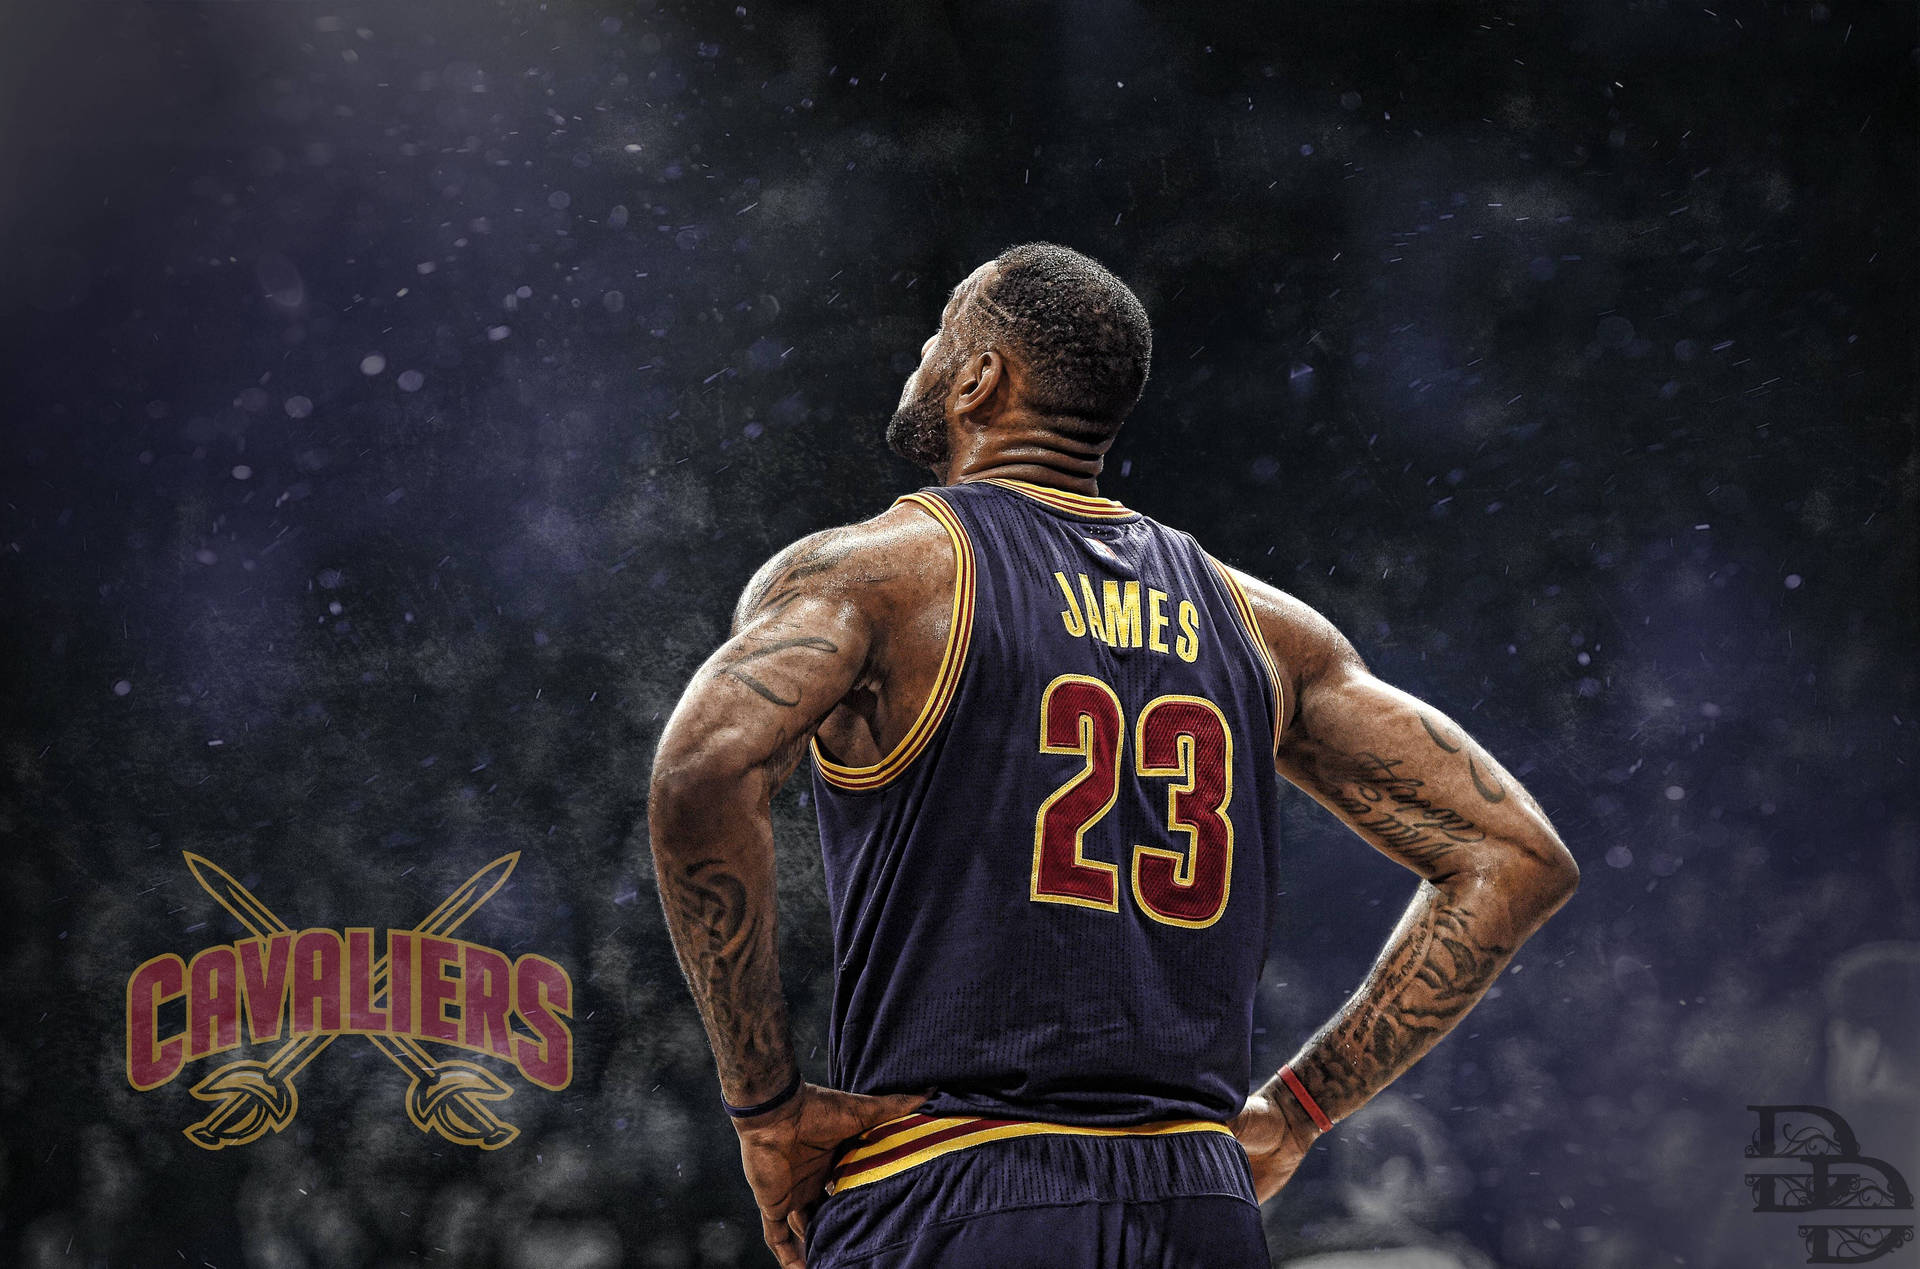 Lebron James in his Cleveland Cavaliers jersey Wallpaper